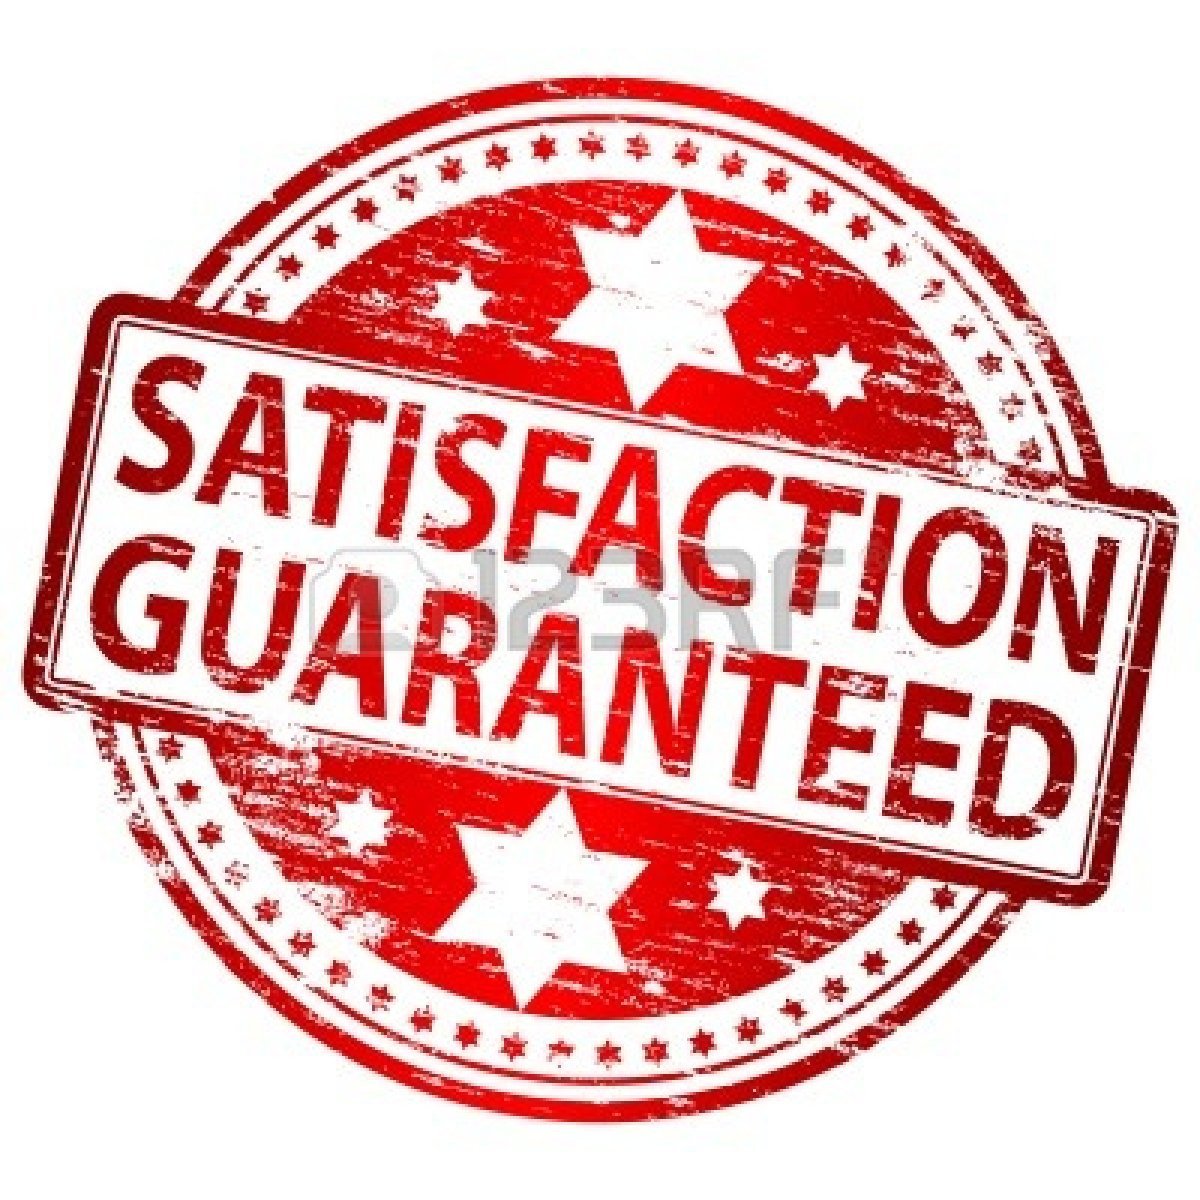 8986328 satisfaction guaranteed rubber stamp 9fbbcc21 7a38 425f a226 3a32fde8cfc3